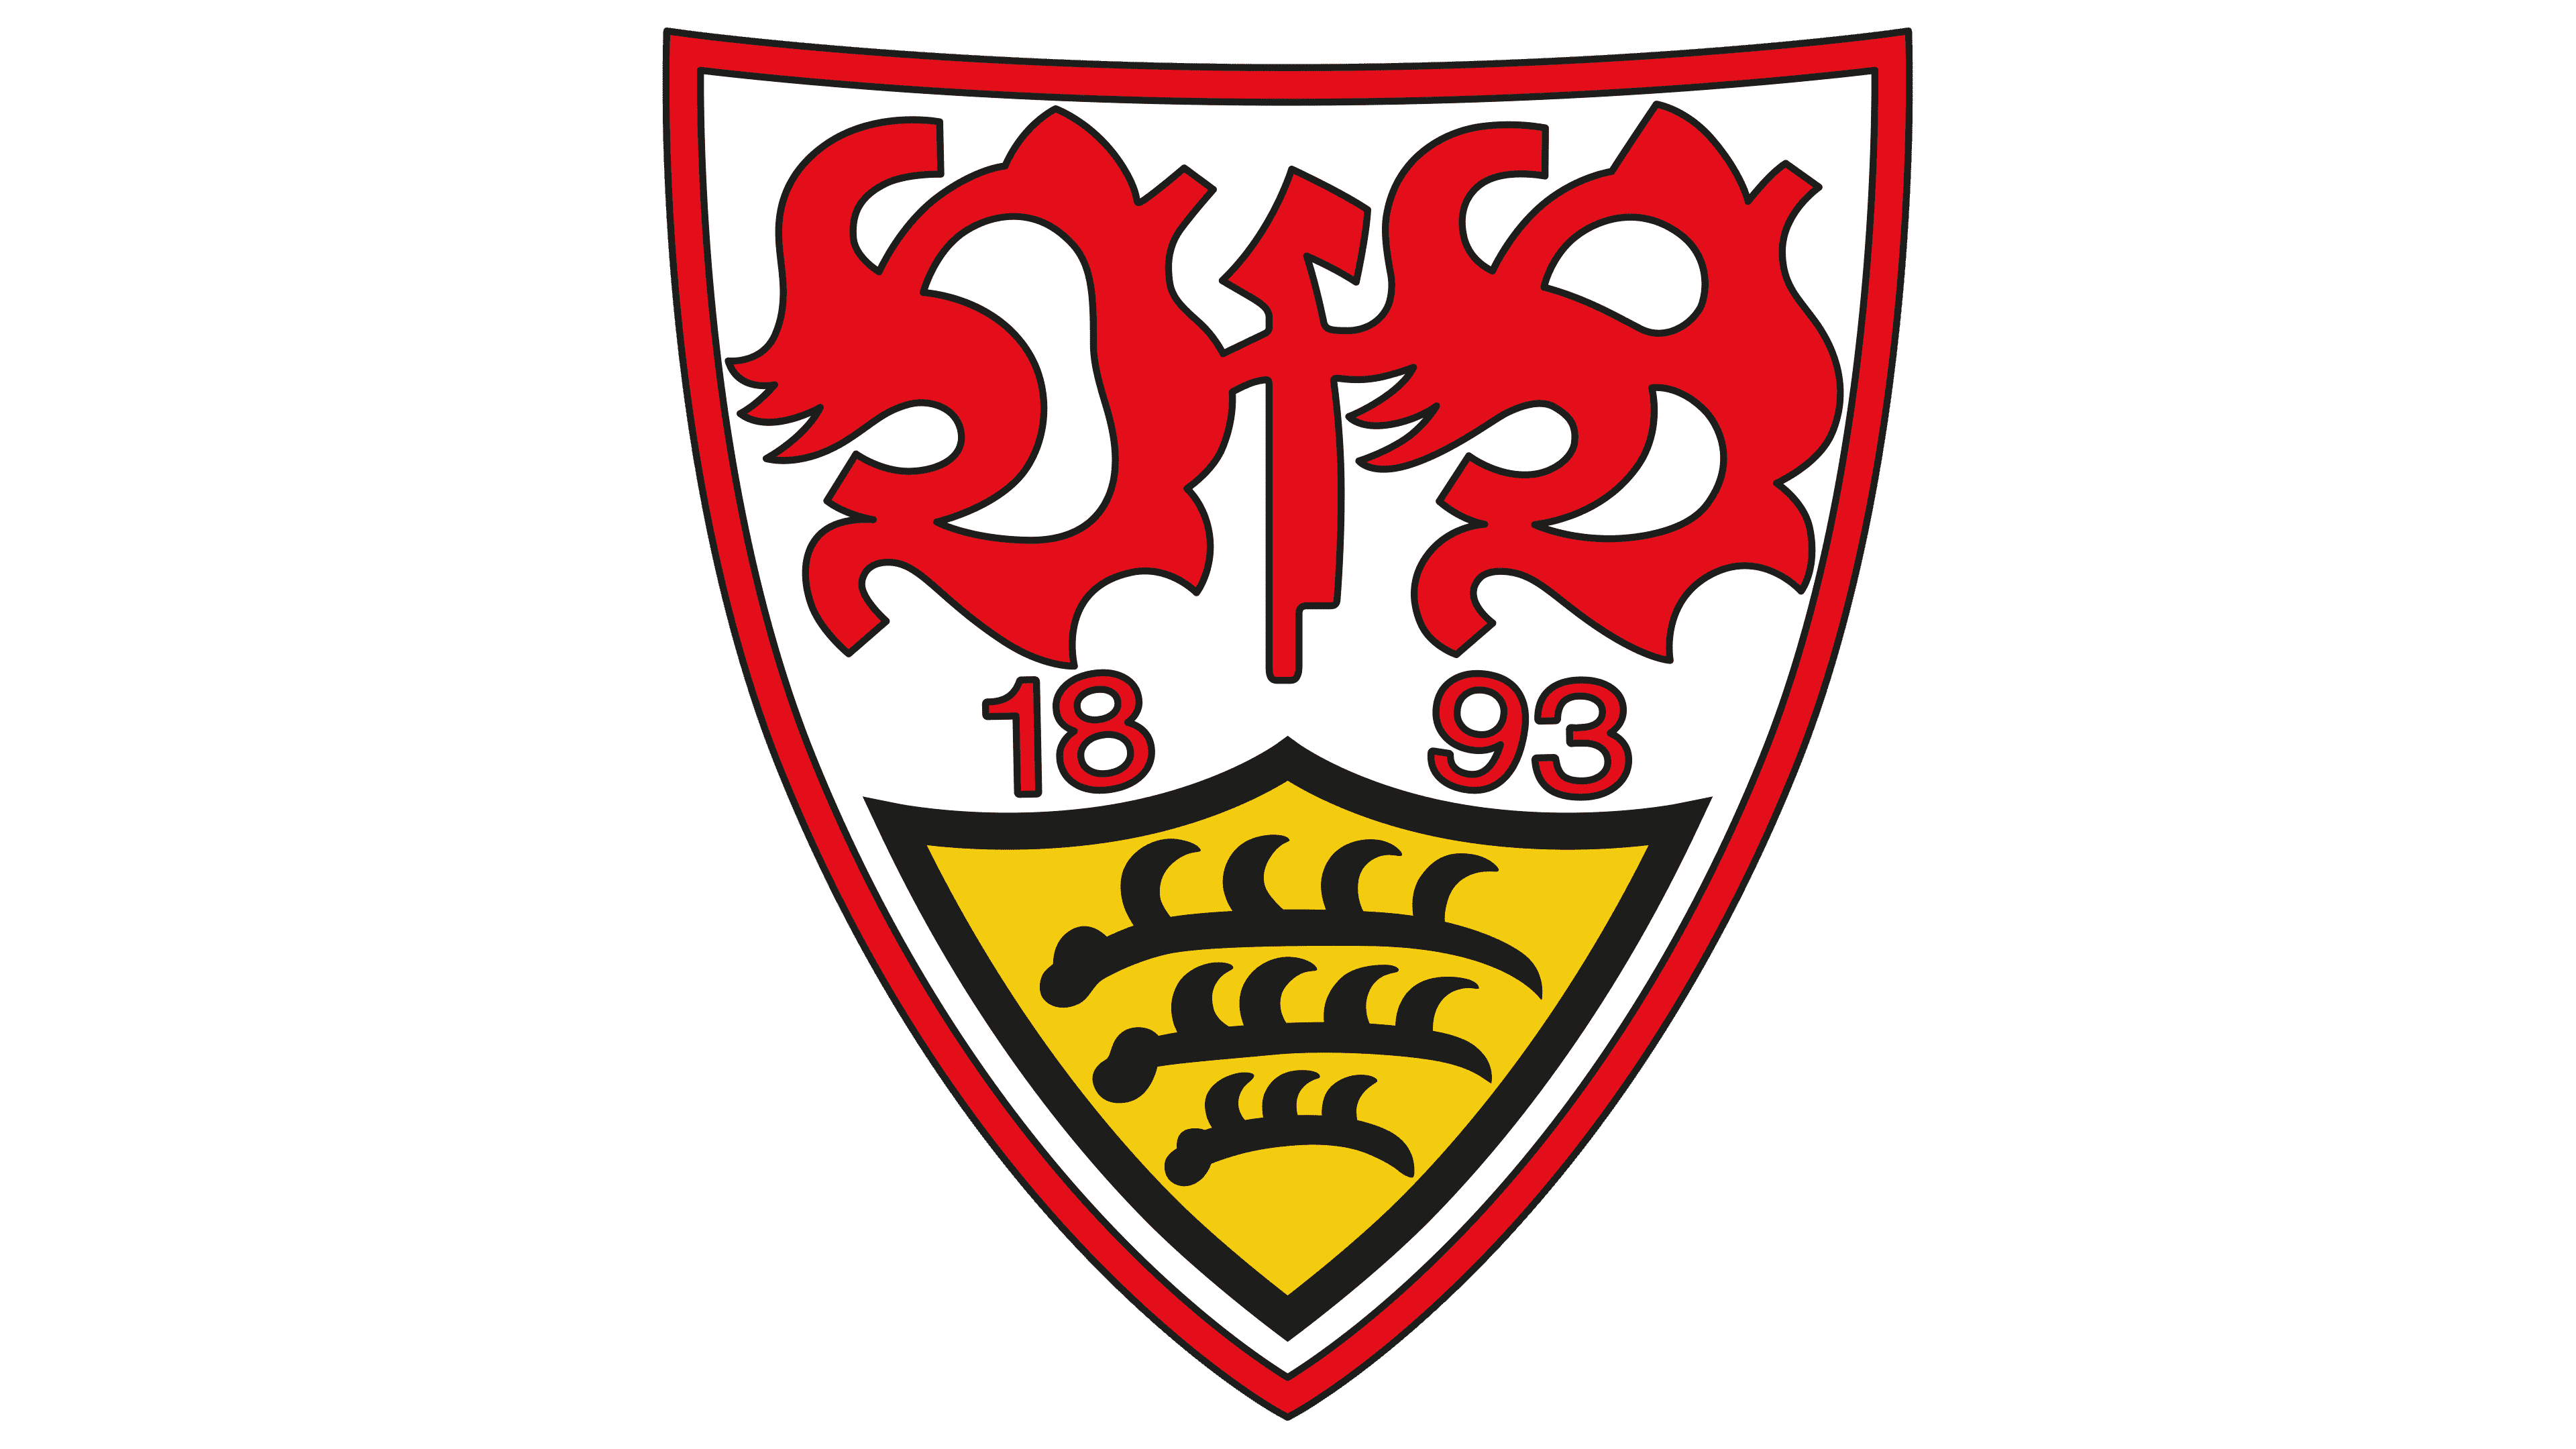 Football Logo changes in recent years. Stuttgart one of the few